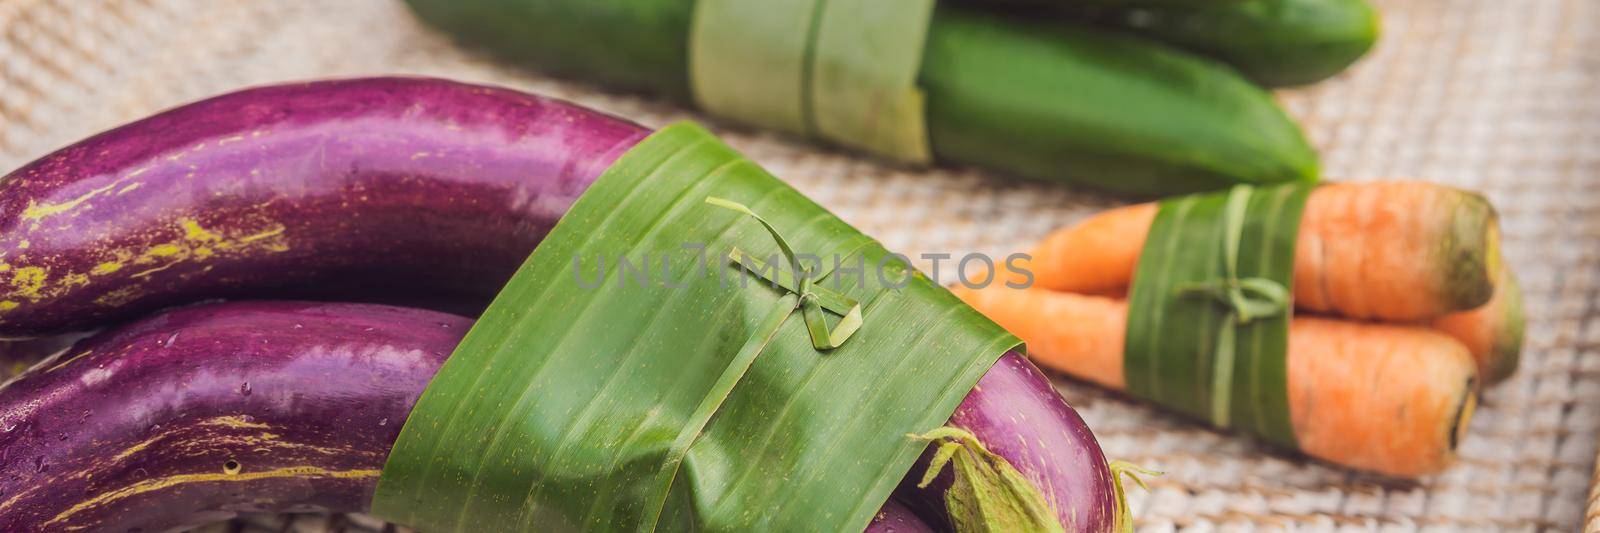 BANNER, LONG FORMAT Eco-friendly product packaging concept. Vegetables wrapped in a banana leaf, as an alternative to a plastic bag. Zero waste concept. Alternative packaging.